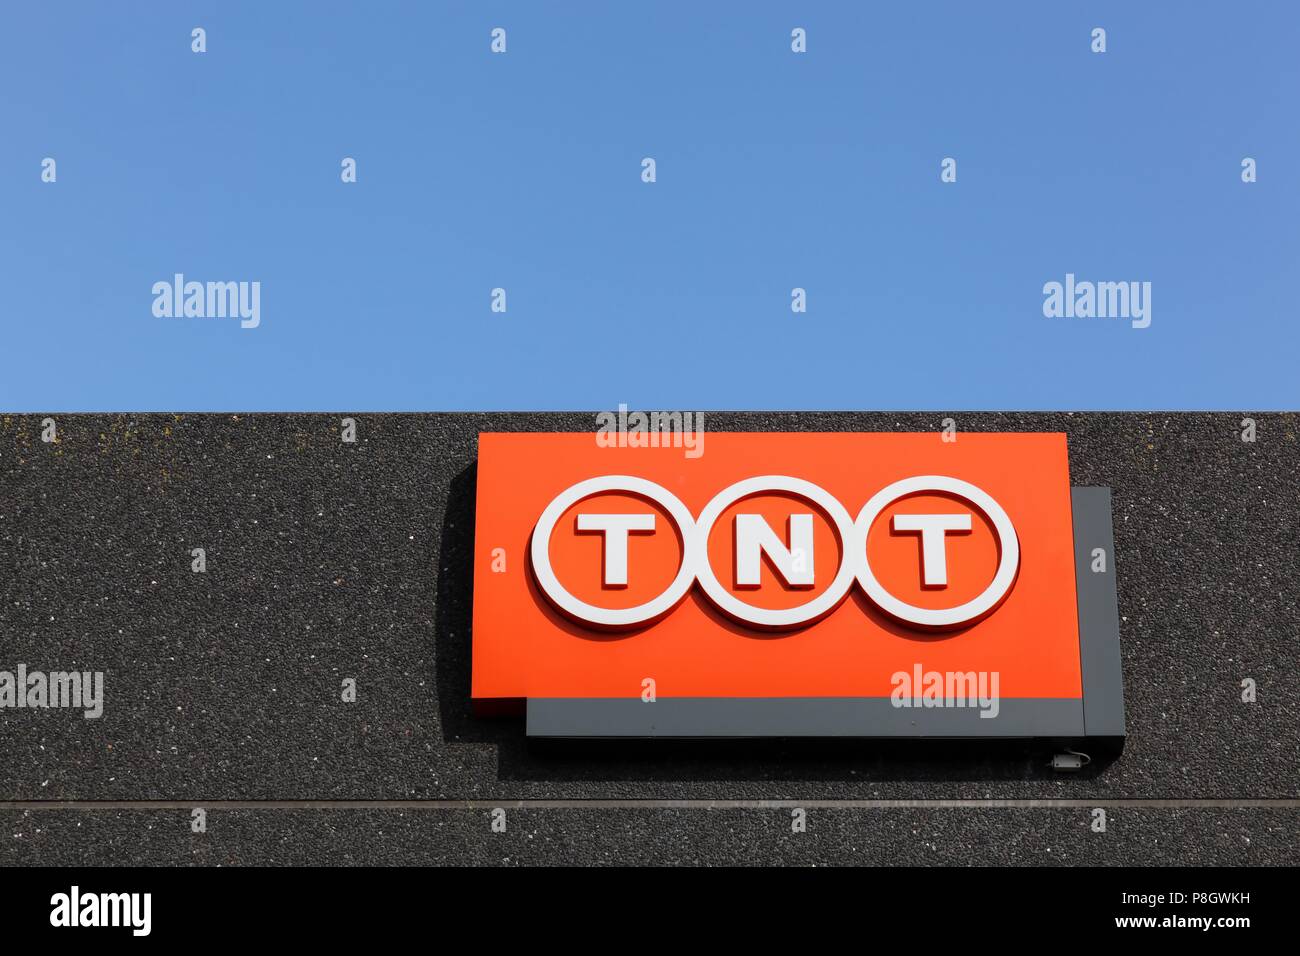 Kolding, Denmark - February 28, 2016: TNT logo sign on a facade. TNT is an international express, mail delivery and logistics services company Stock Photo